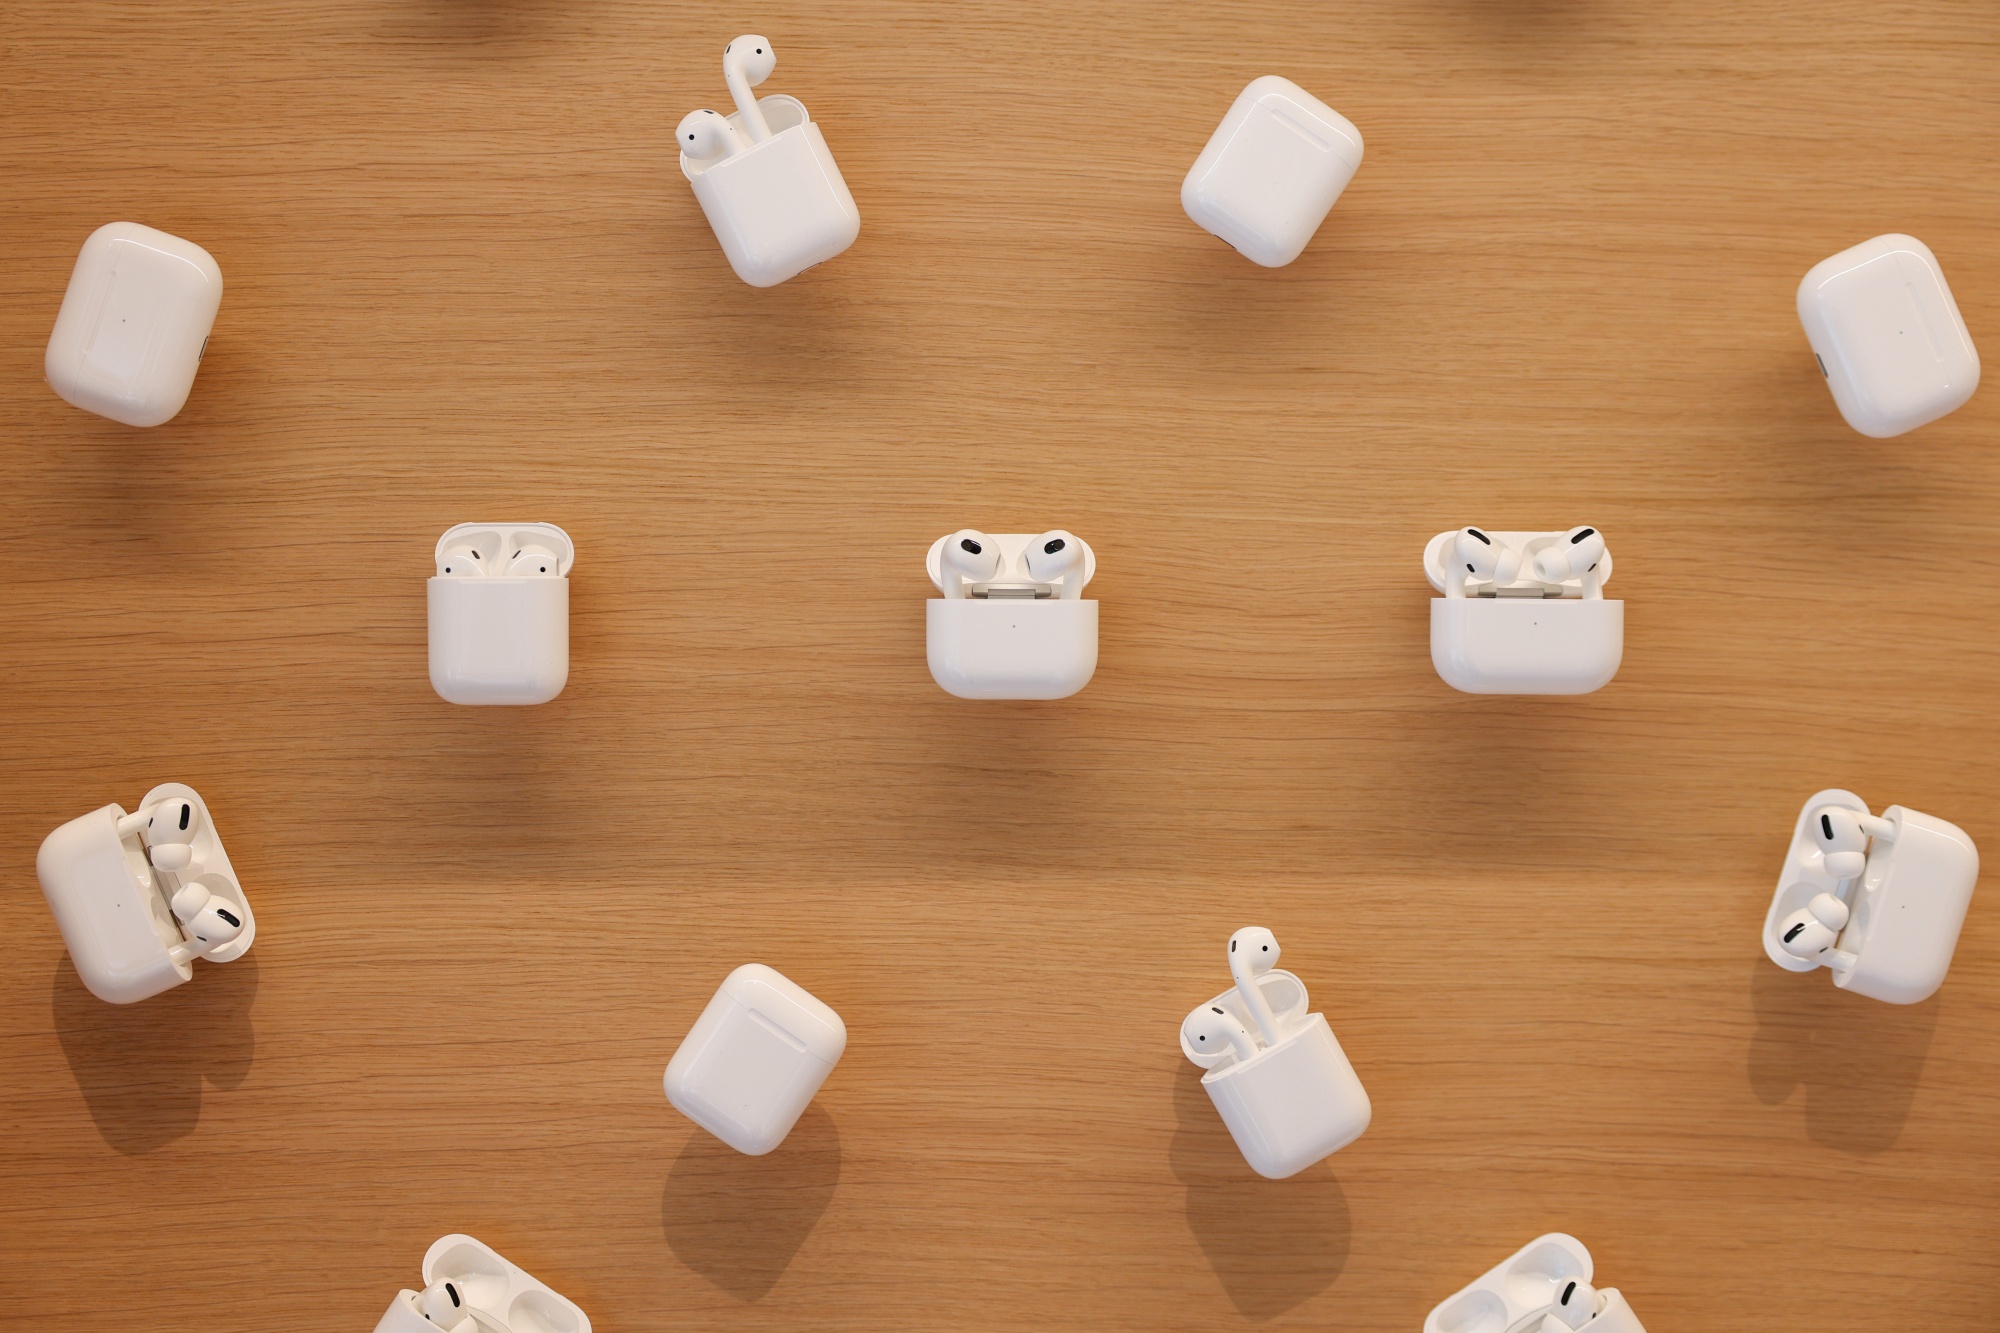 Apple AirPods Plans: 4th Generation Low-End, 3rd Generation Pro